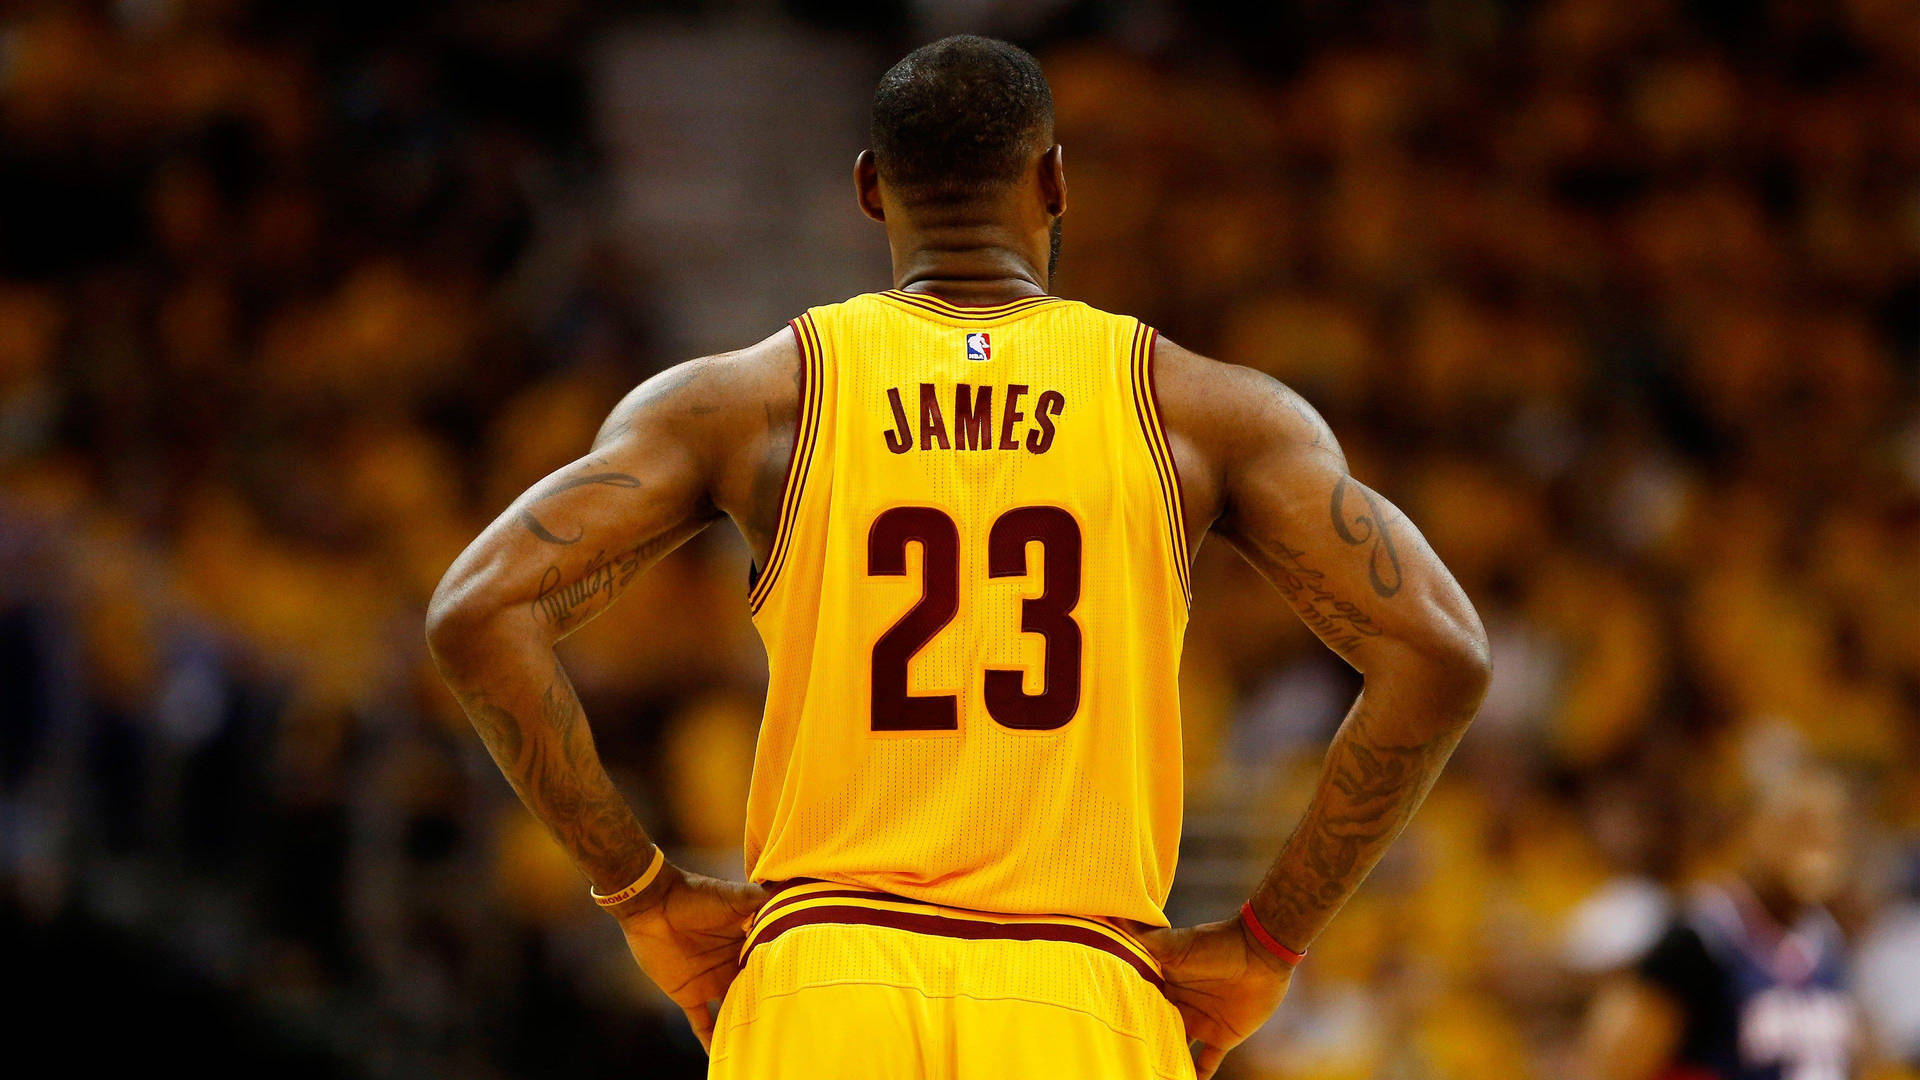 LeBron James 23 NBA Wallpaper, HD Sports 4K Wallpapers, Images and  Background - Wallpapers Den